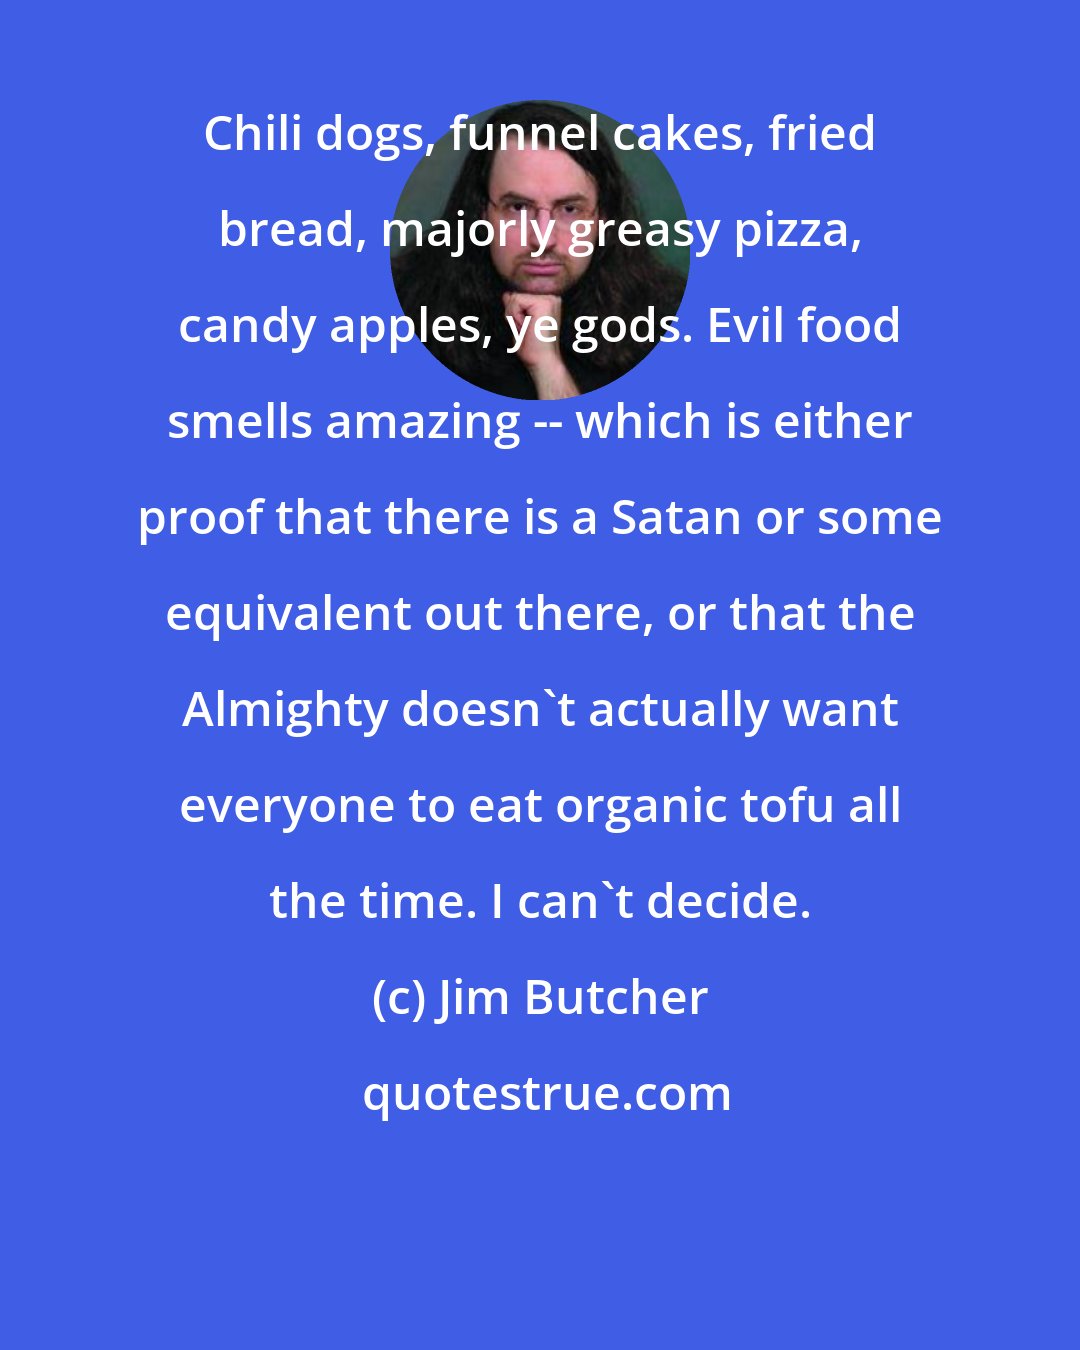 Jim Butcher: Chili dogs, funnel cakes, fried bread, majorly greasy pizza, candy apples, ye gods. Evil food smells amazing -- which is either proof that there is a Satan or some equivalent out there, or that the Almighty doesn't actually want everyone to eat organic tofu all the time. I can't decide.